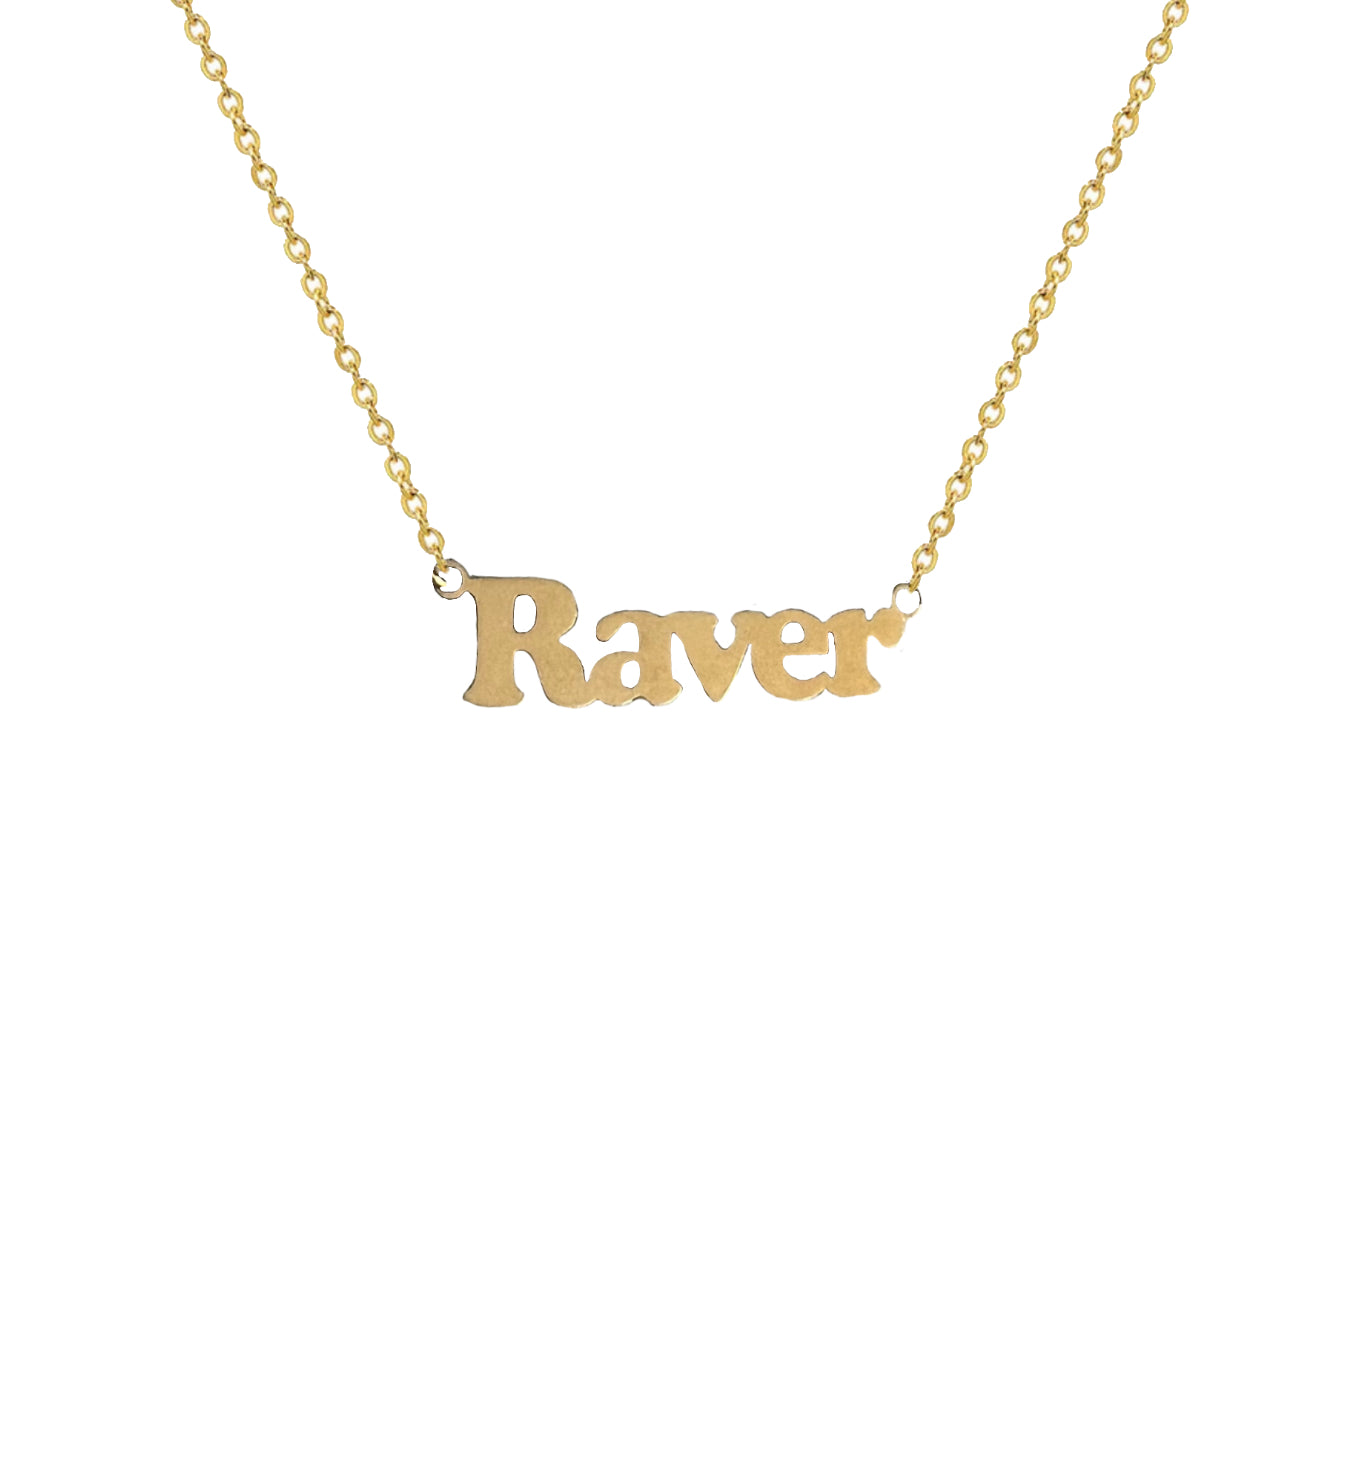 AuLaLa Cheeky Words Necklaces - Raver